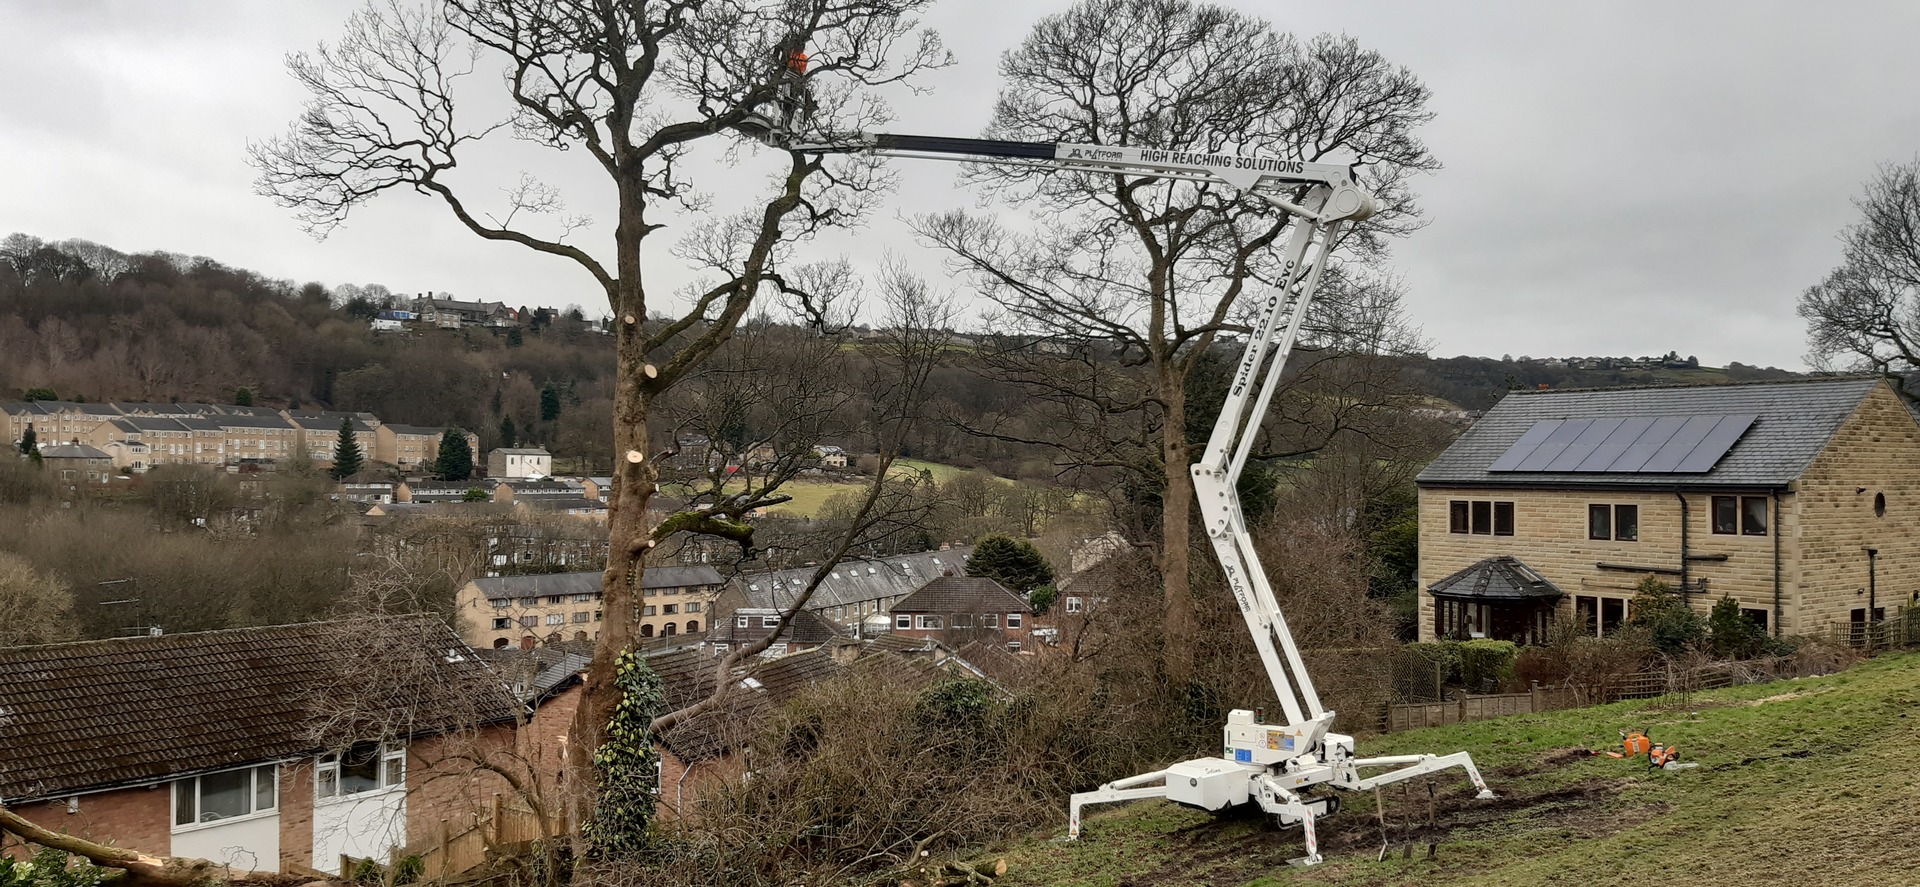 Selina, High Reaching Solutions 22m Lithium hybrid tracked spiderlift cherrypicker, set-up on steep grass bank and boomed fully out assisting an arborist to dismantle a dangerous storm damaged tree near Halifax.